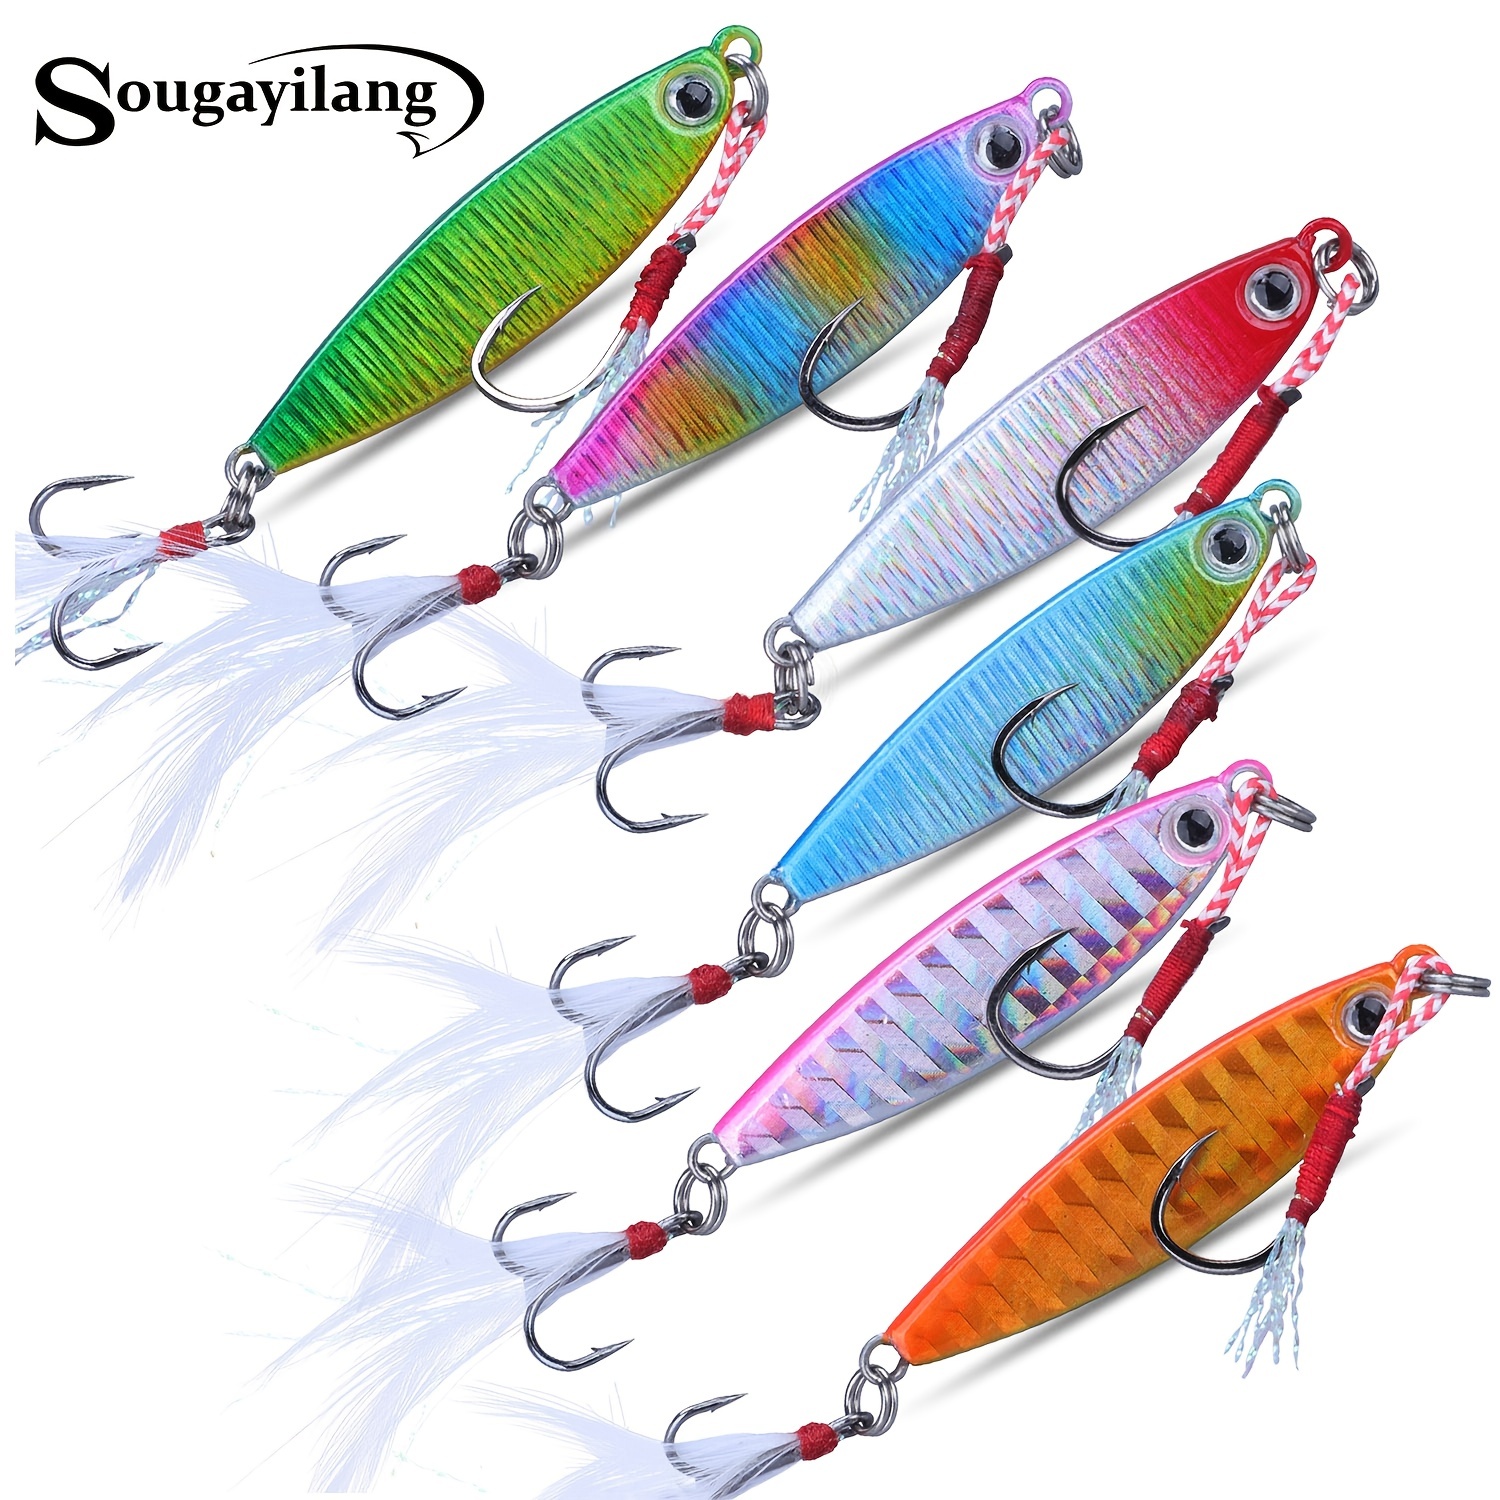 Sougayilang 6pcs Metal Spoon Rooster Tail Fishing Lure With Jigs Hooks,  Hard Baits Tackle For Saltwater Freshwater Bass Trout, Check Out Today's  Deals Now